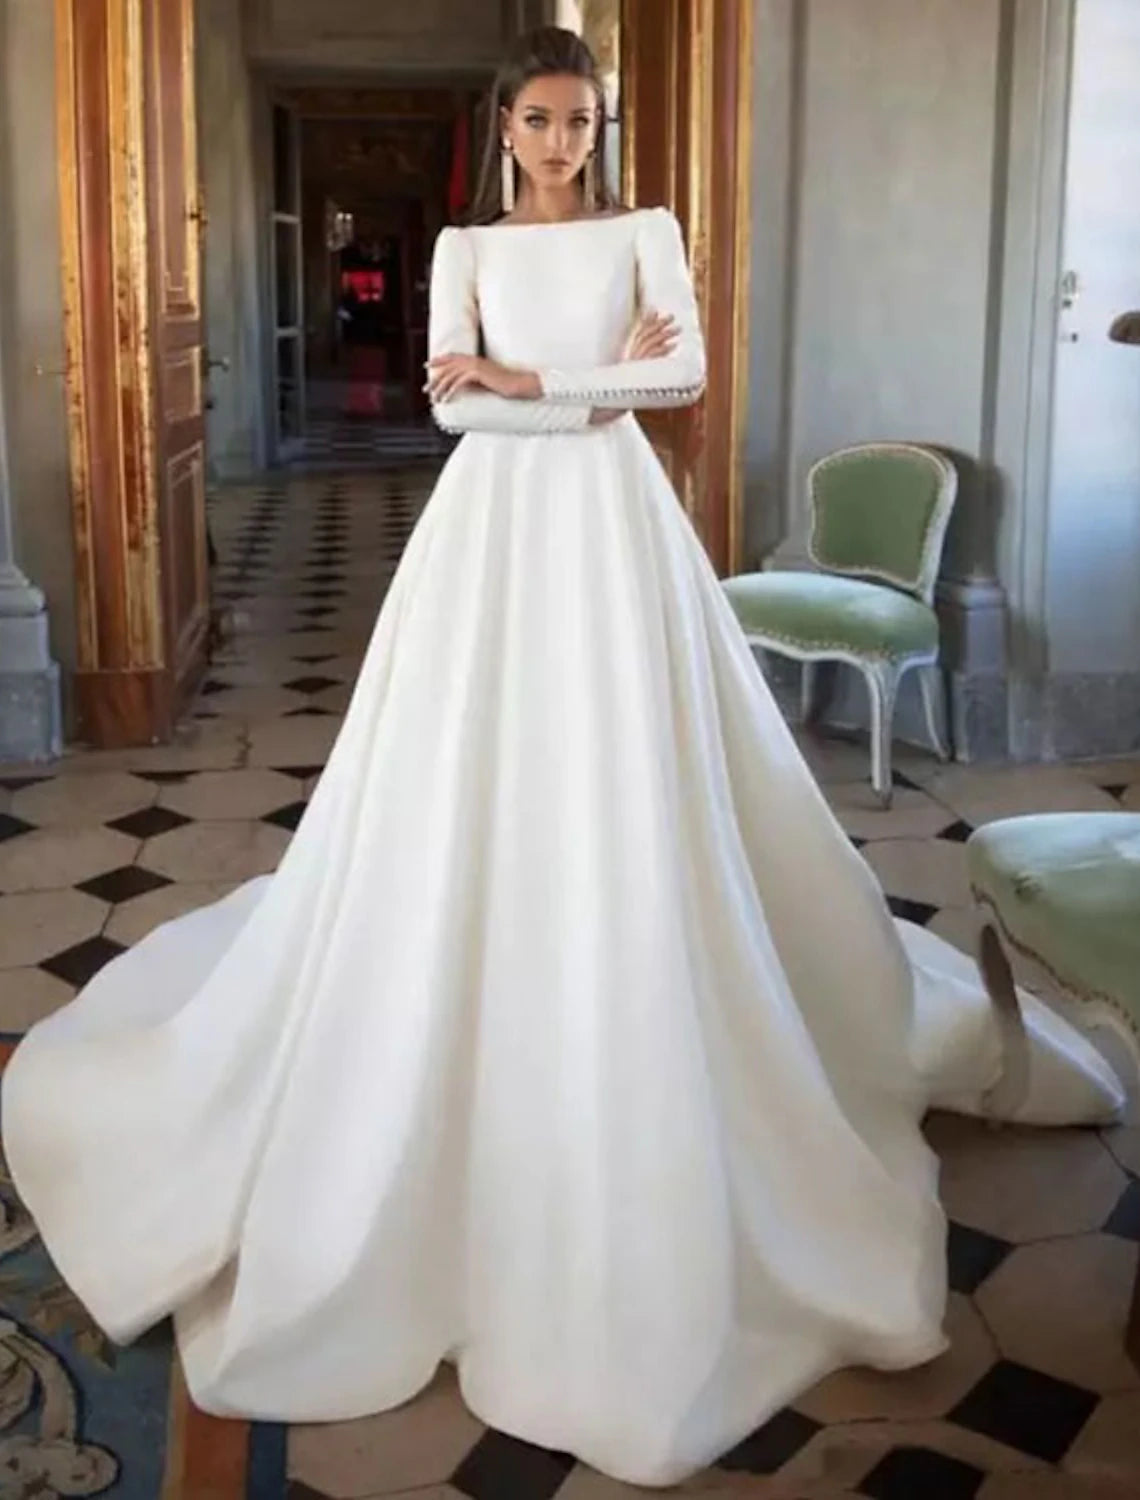 Formal Fall Wedding Dresses Ball Gown Scoop Neck Long Sleeve Court Train Satin Bridal Gowns With Buttons Pleats